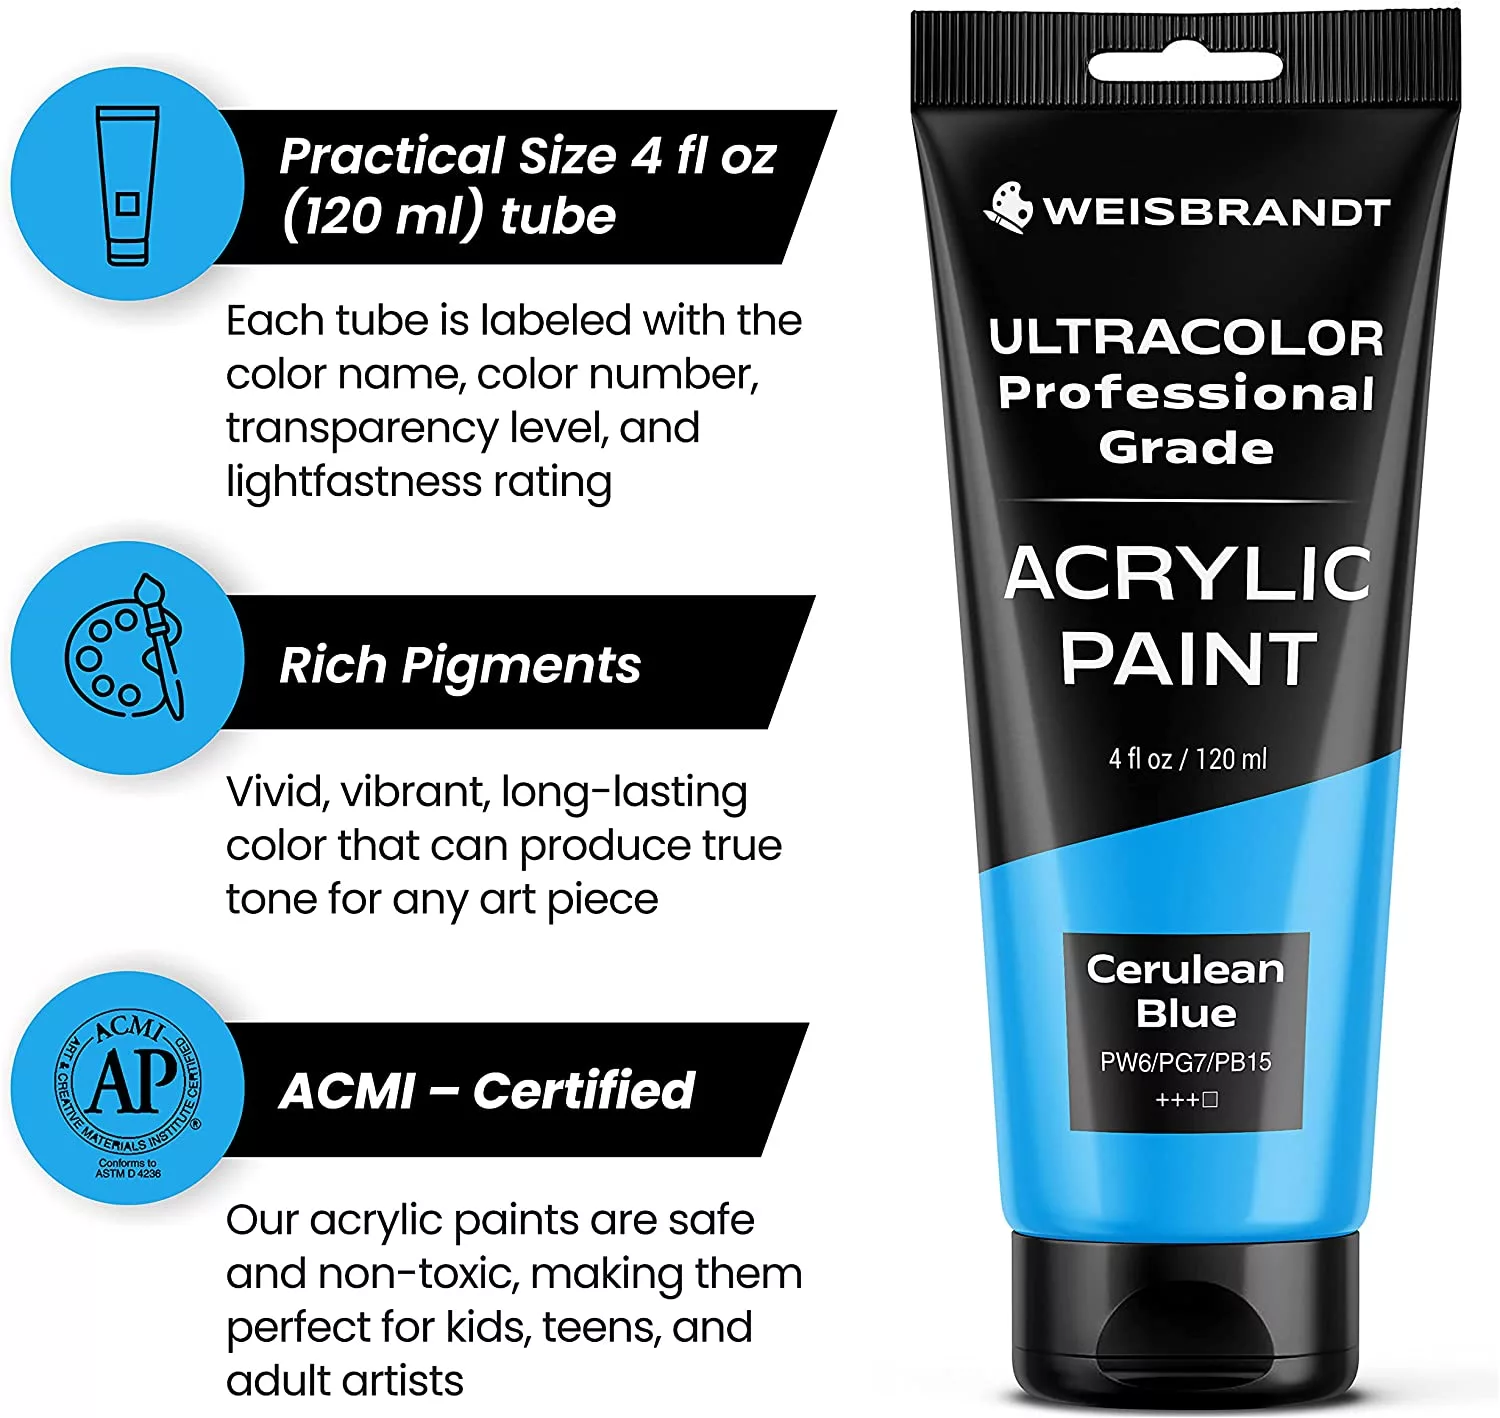 Acrylic Paint Prussian Green 